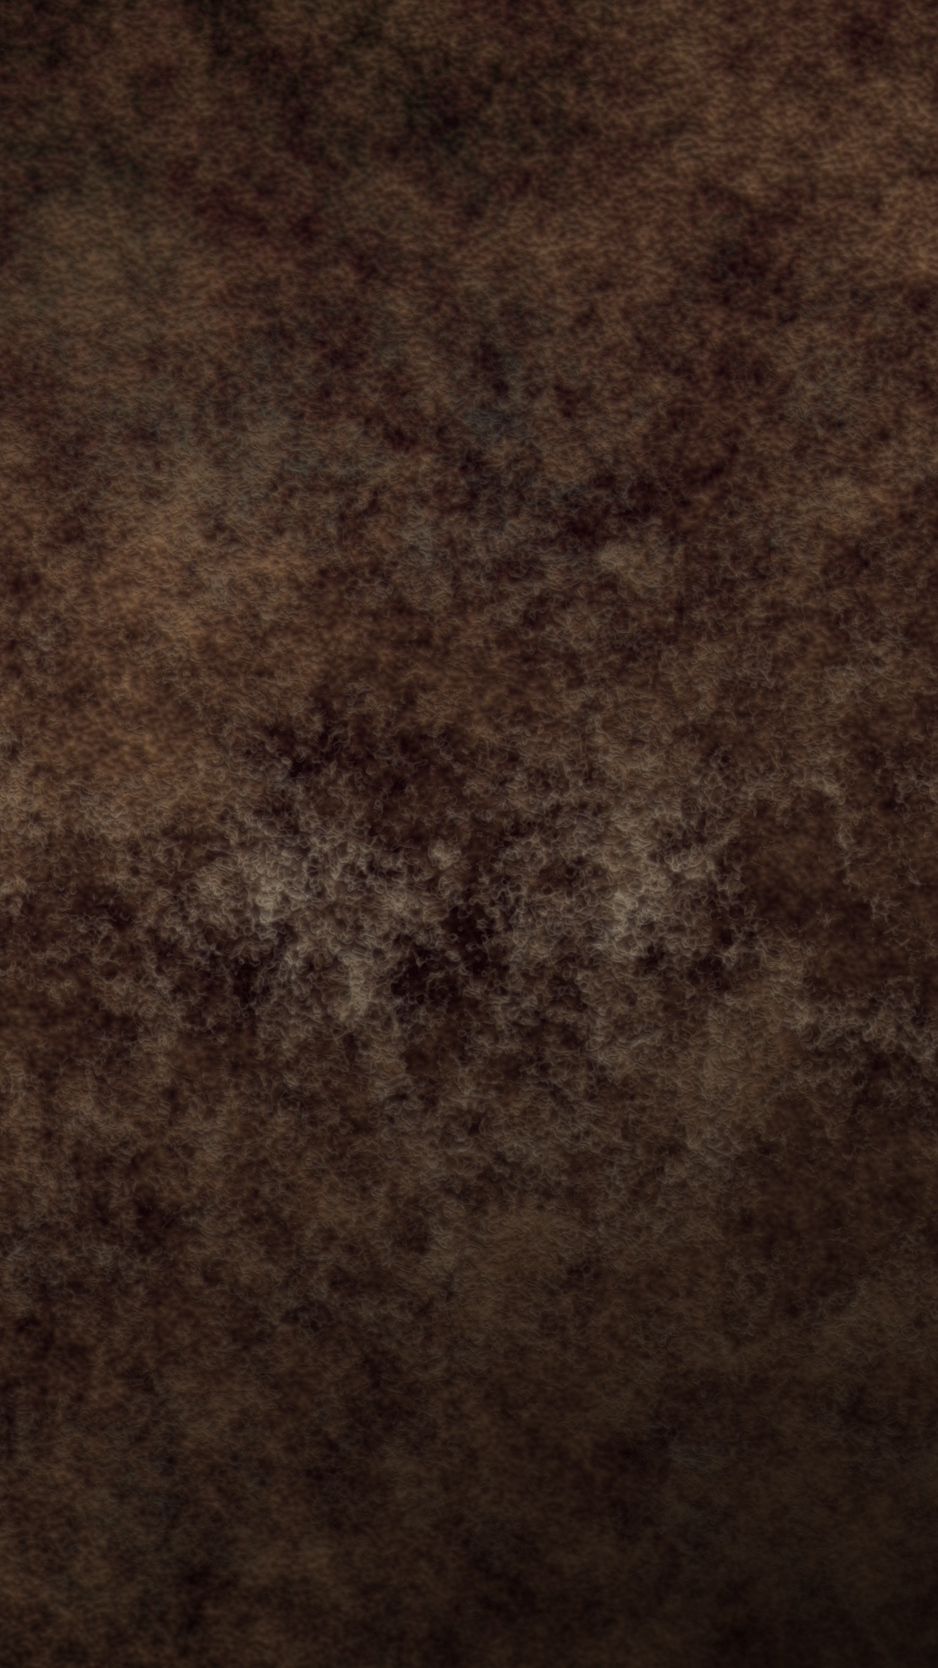 Wallpaper  black dark brown pattern texture grid cells cloth  angle computer wallpaper font wood stain 2560x1600  CoolWallpapers   773443  HD Wallpapers  WallHere